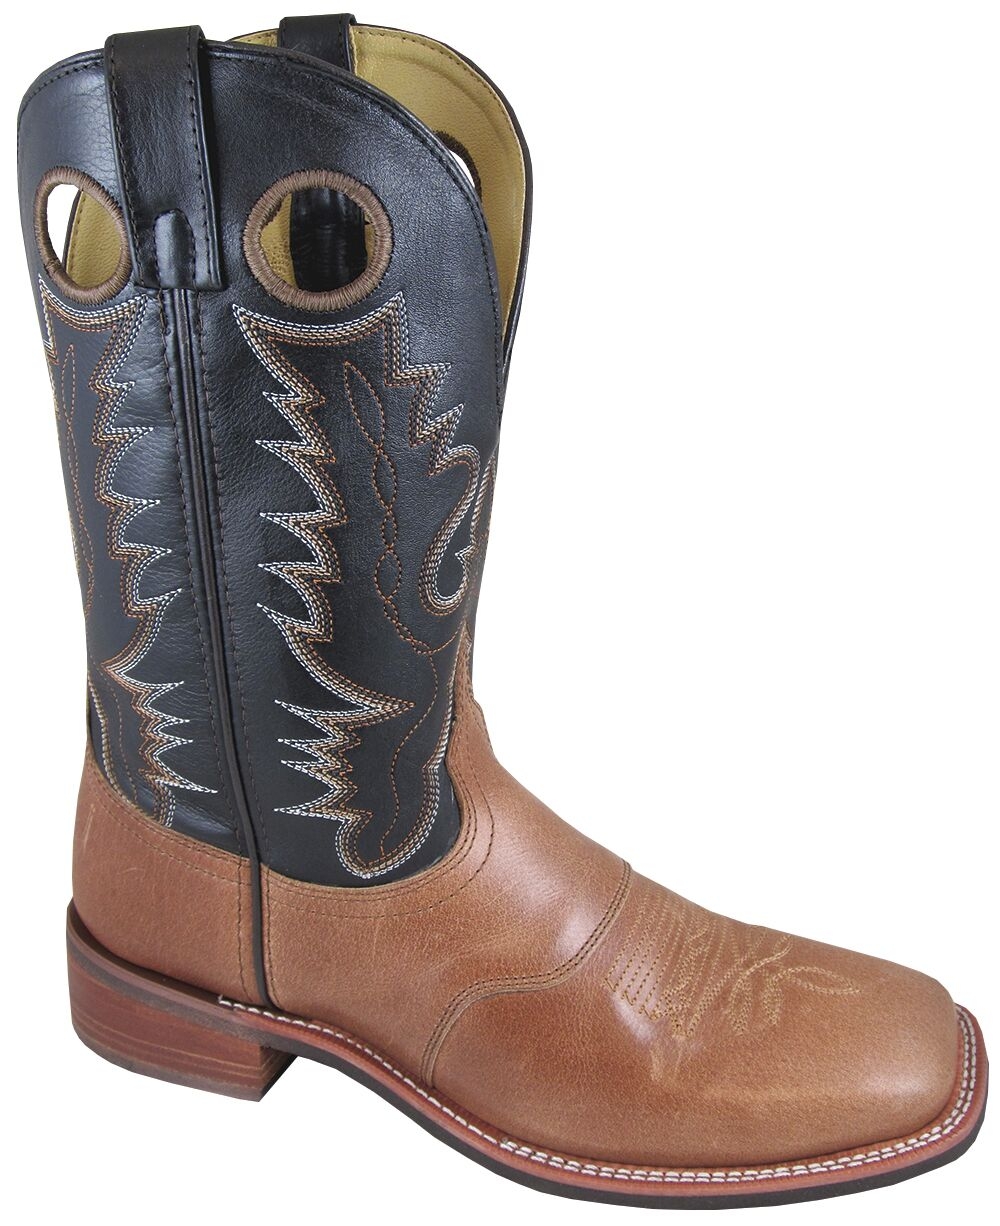 NEW Ladies Smoky Mountain Boots Western Cowboy Leather Black w Scroll Square Toe 